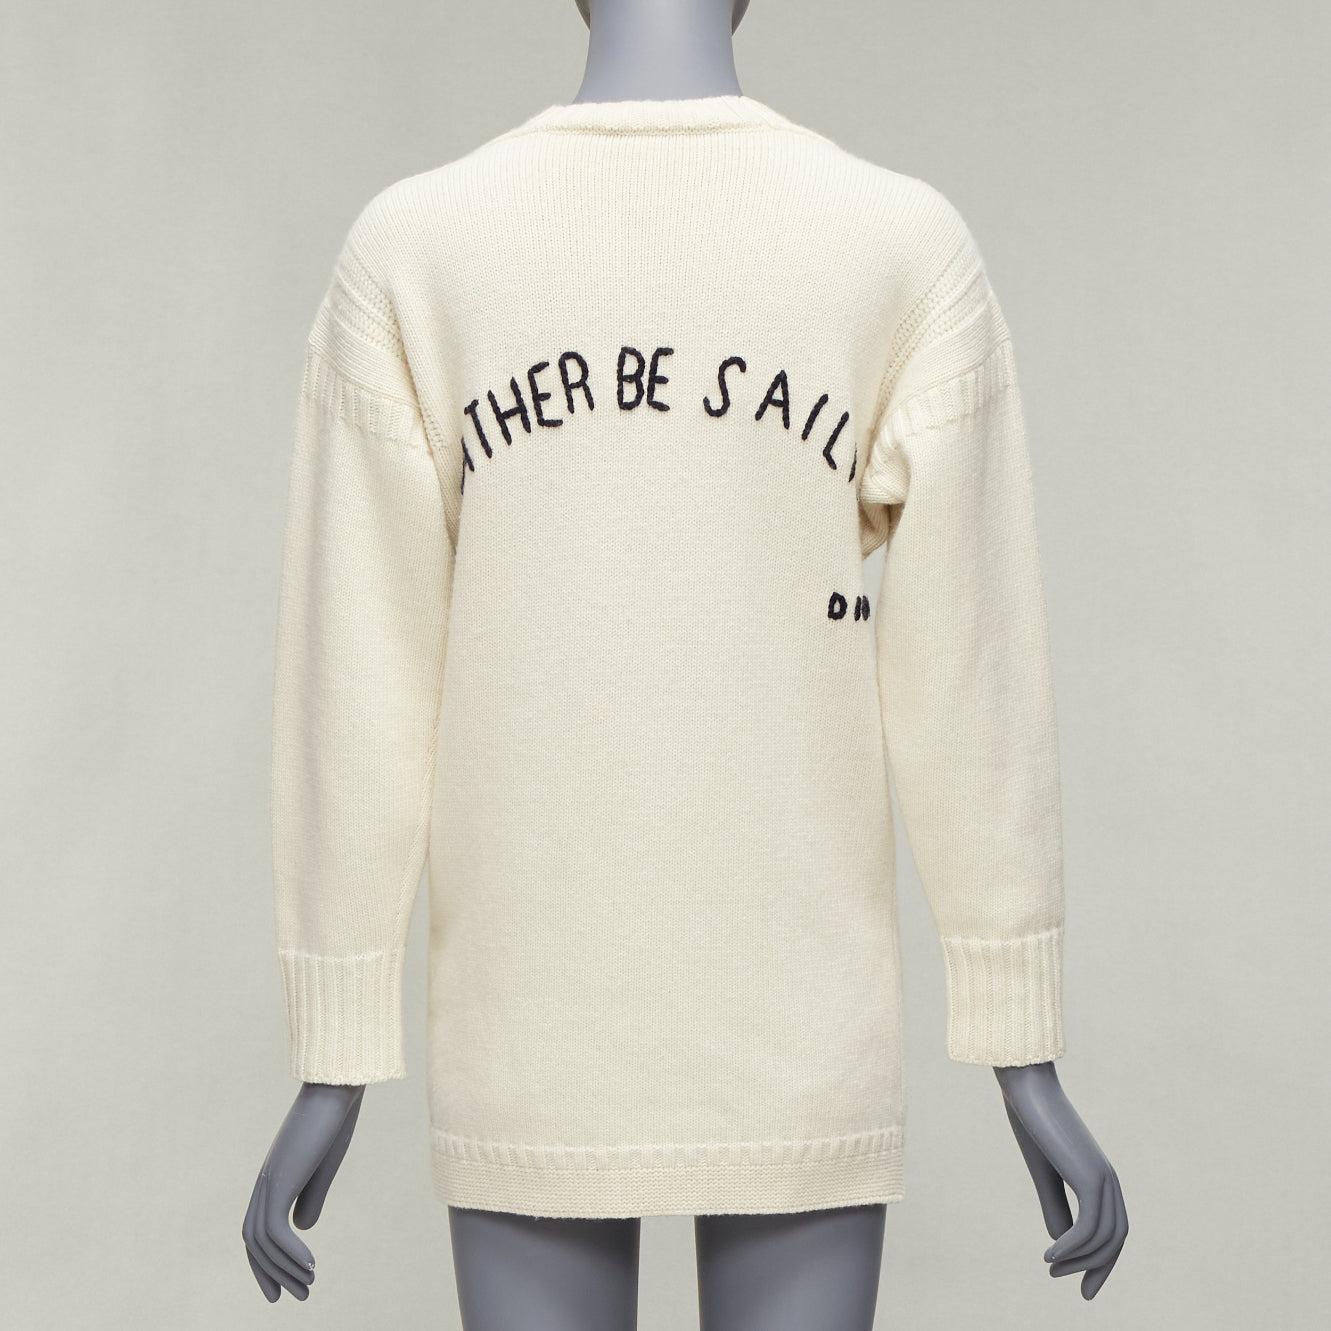 DIOR 2019 wool cashmere cream Rather Be Sailing long pullover sweater FR34 XS
Reference: YIKK/A00058
Brand: Dior
Designer: Maria Grazia Chiuri
Model: Rather Be Sailing
Collection: 2019 AW
Material: Wool, Cashmere
Color: Cream
Pattern: Solid
Closure: